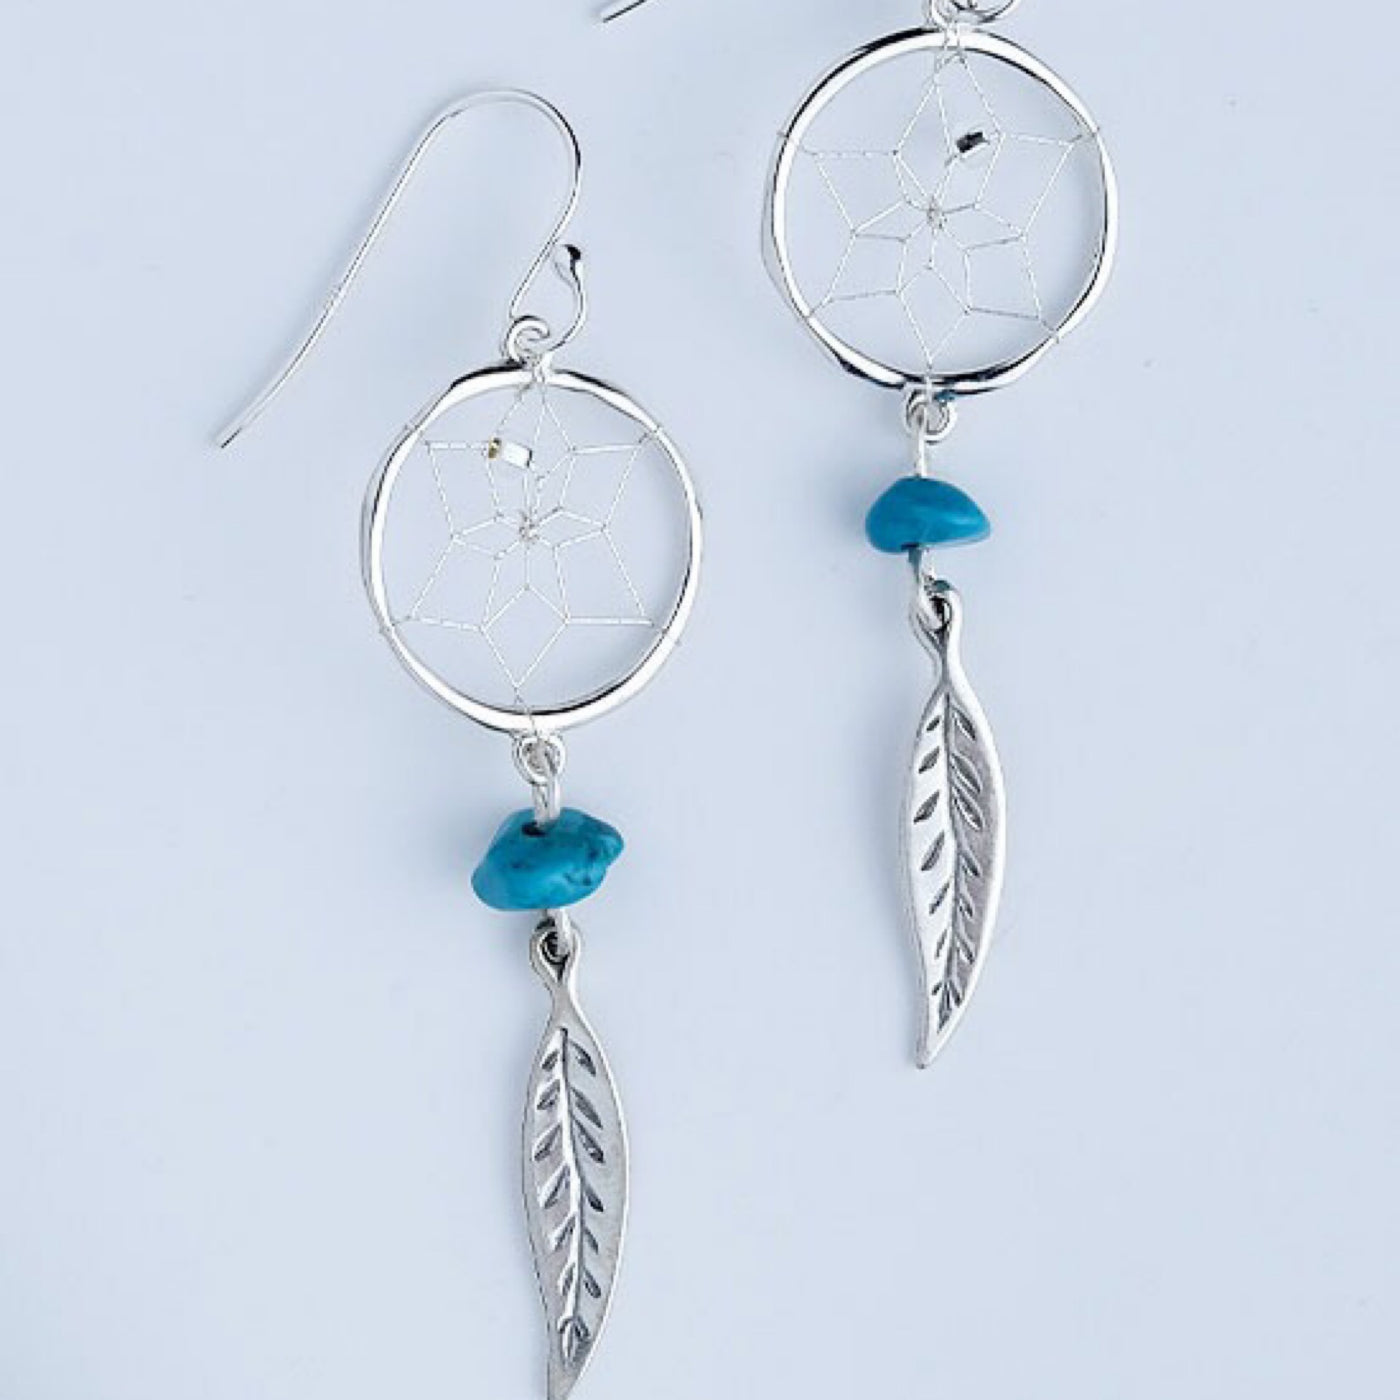 Earrings | Dreamcatcher and Silver Feather